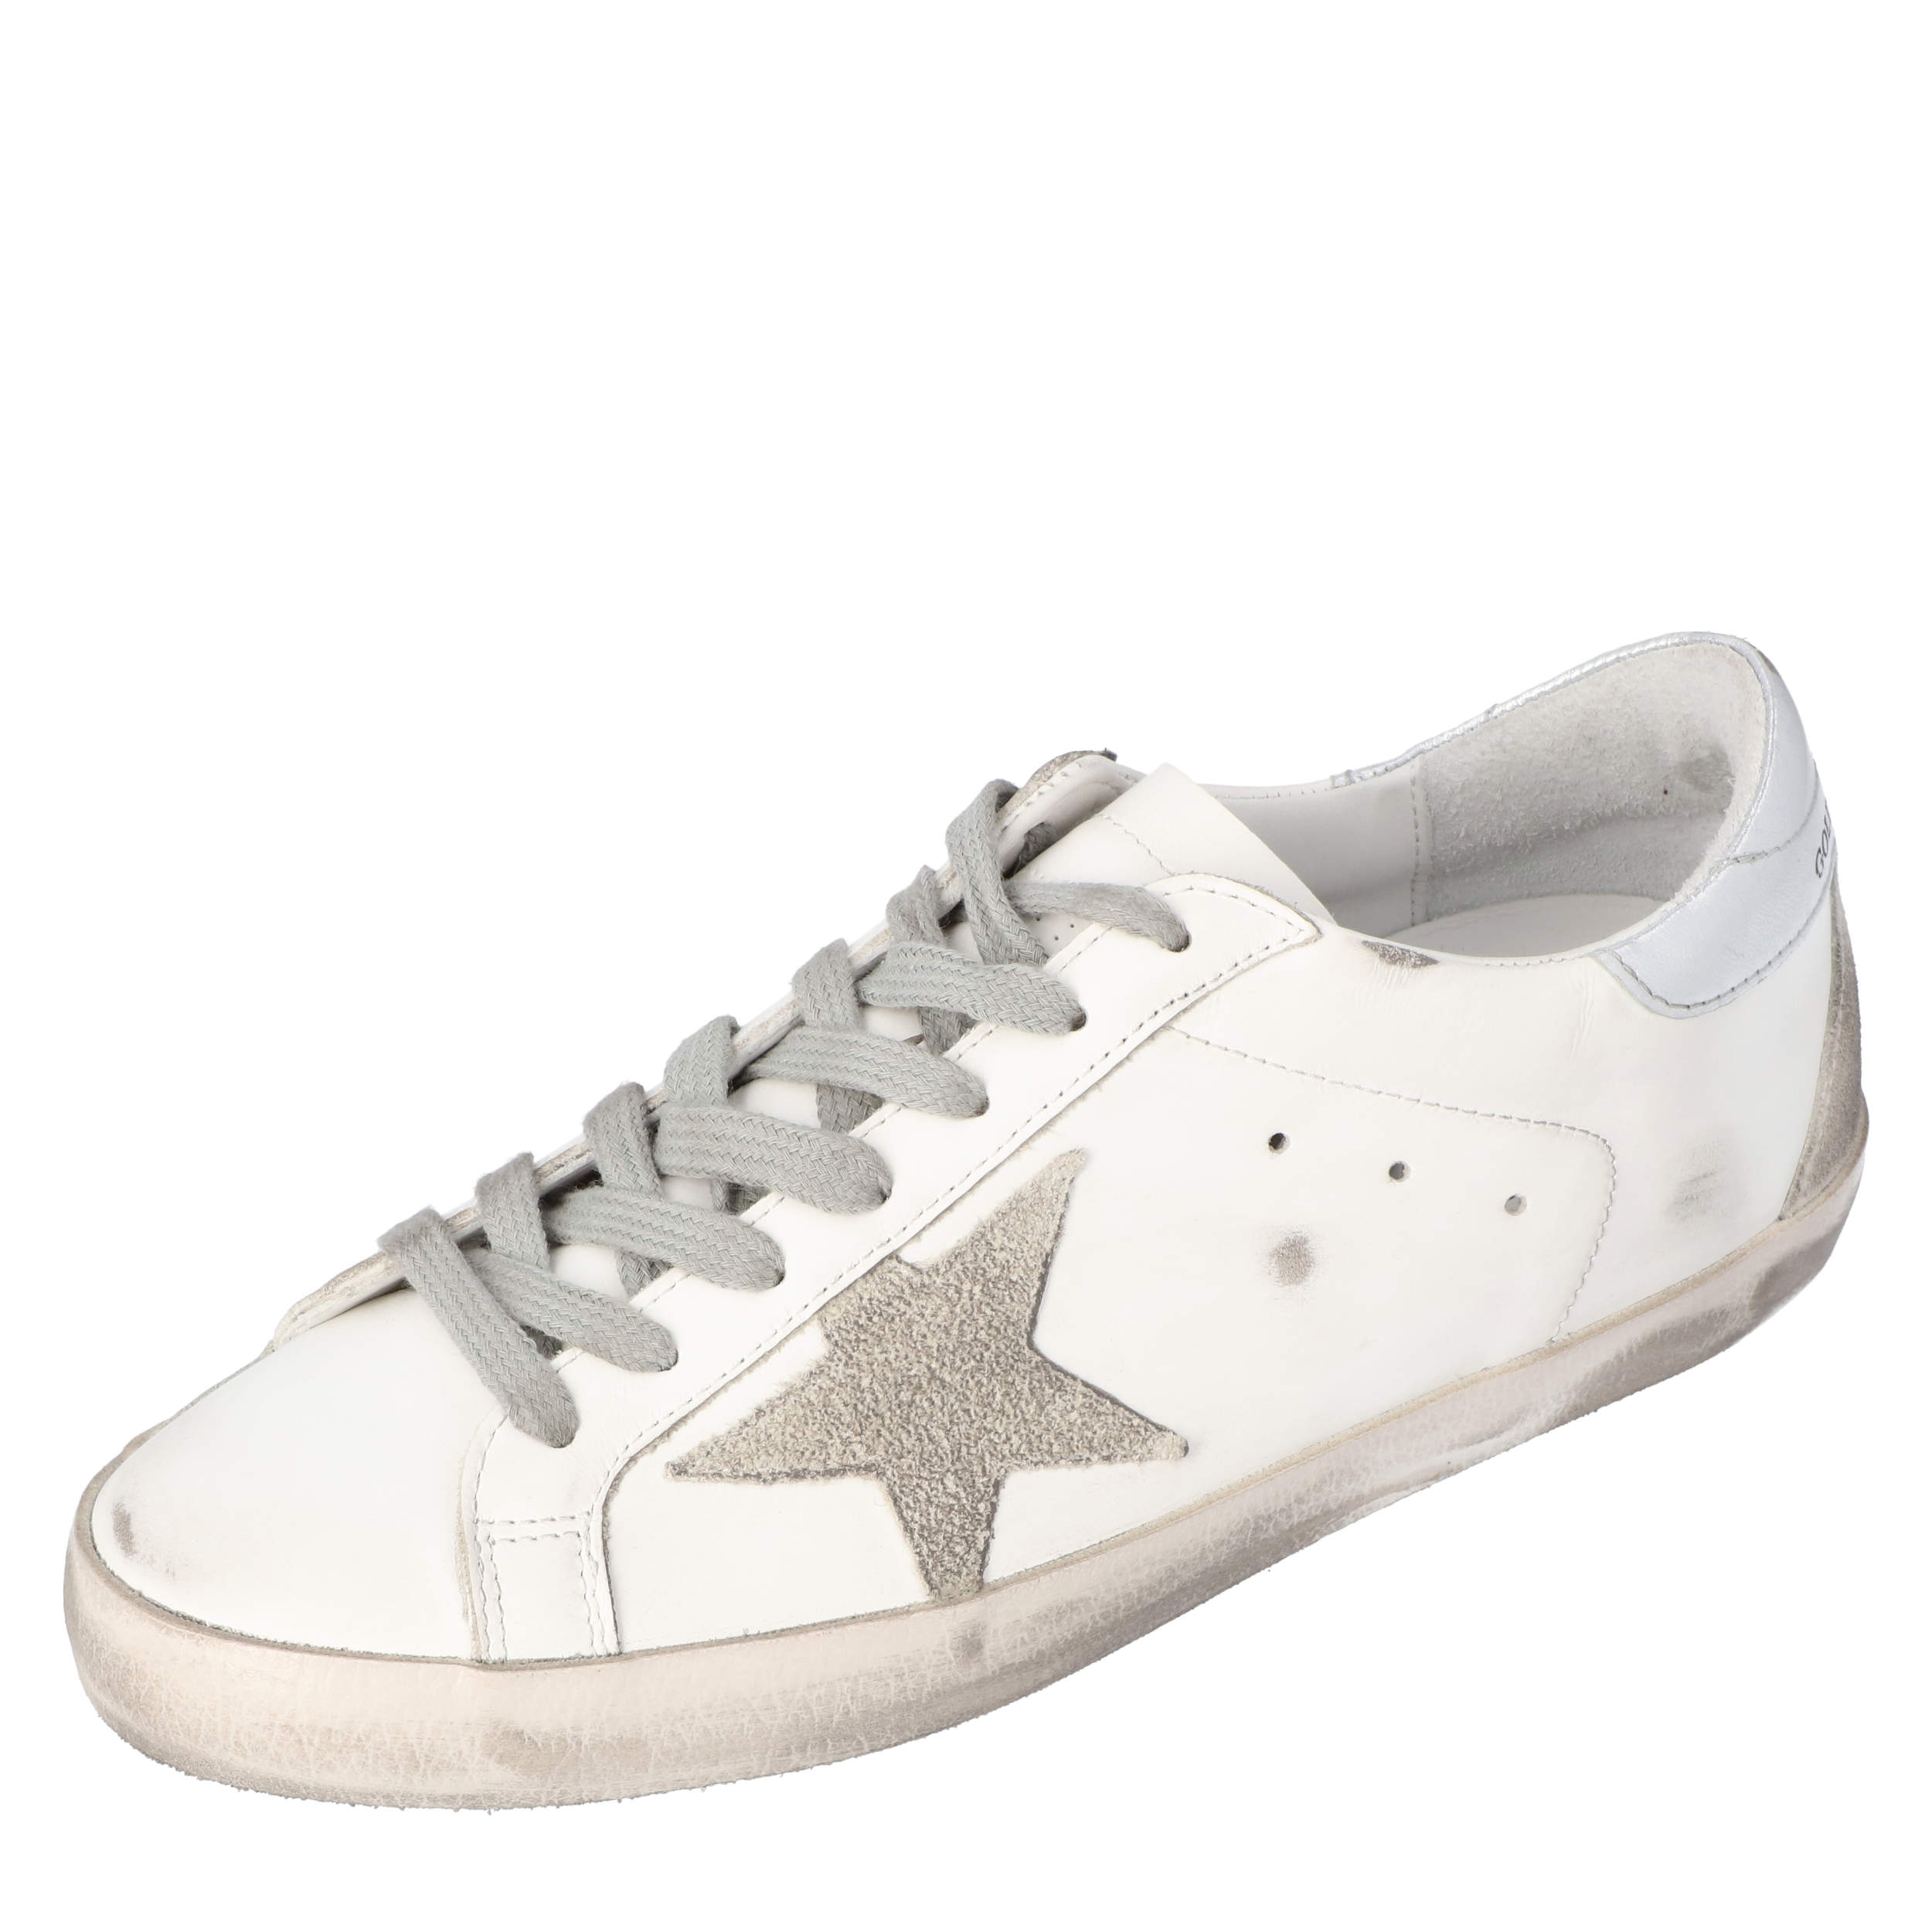 Golden Goose White Superstar Sneakers Size 40